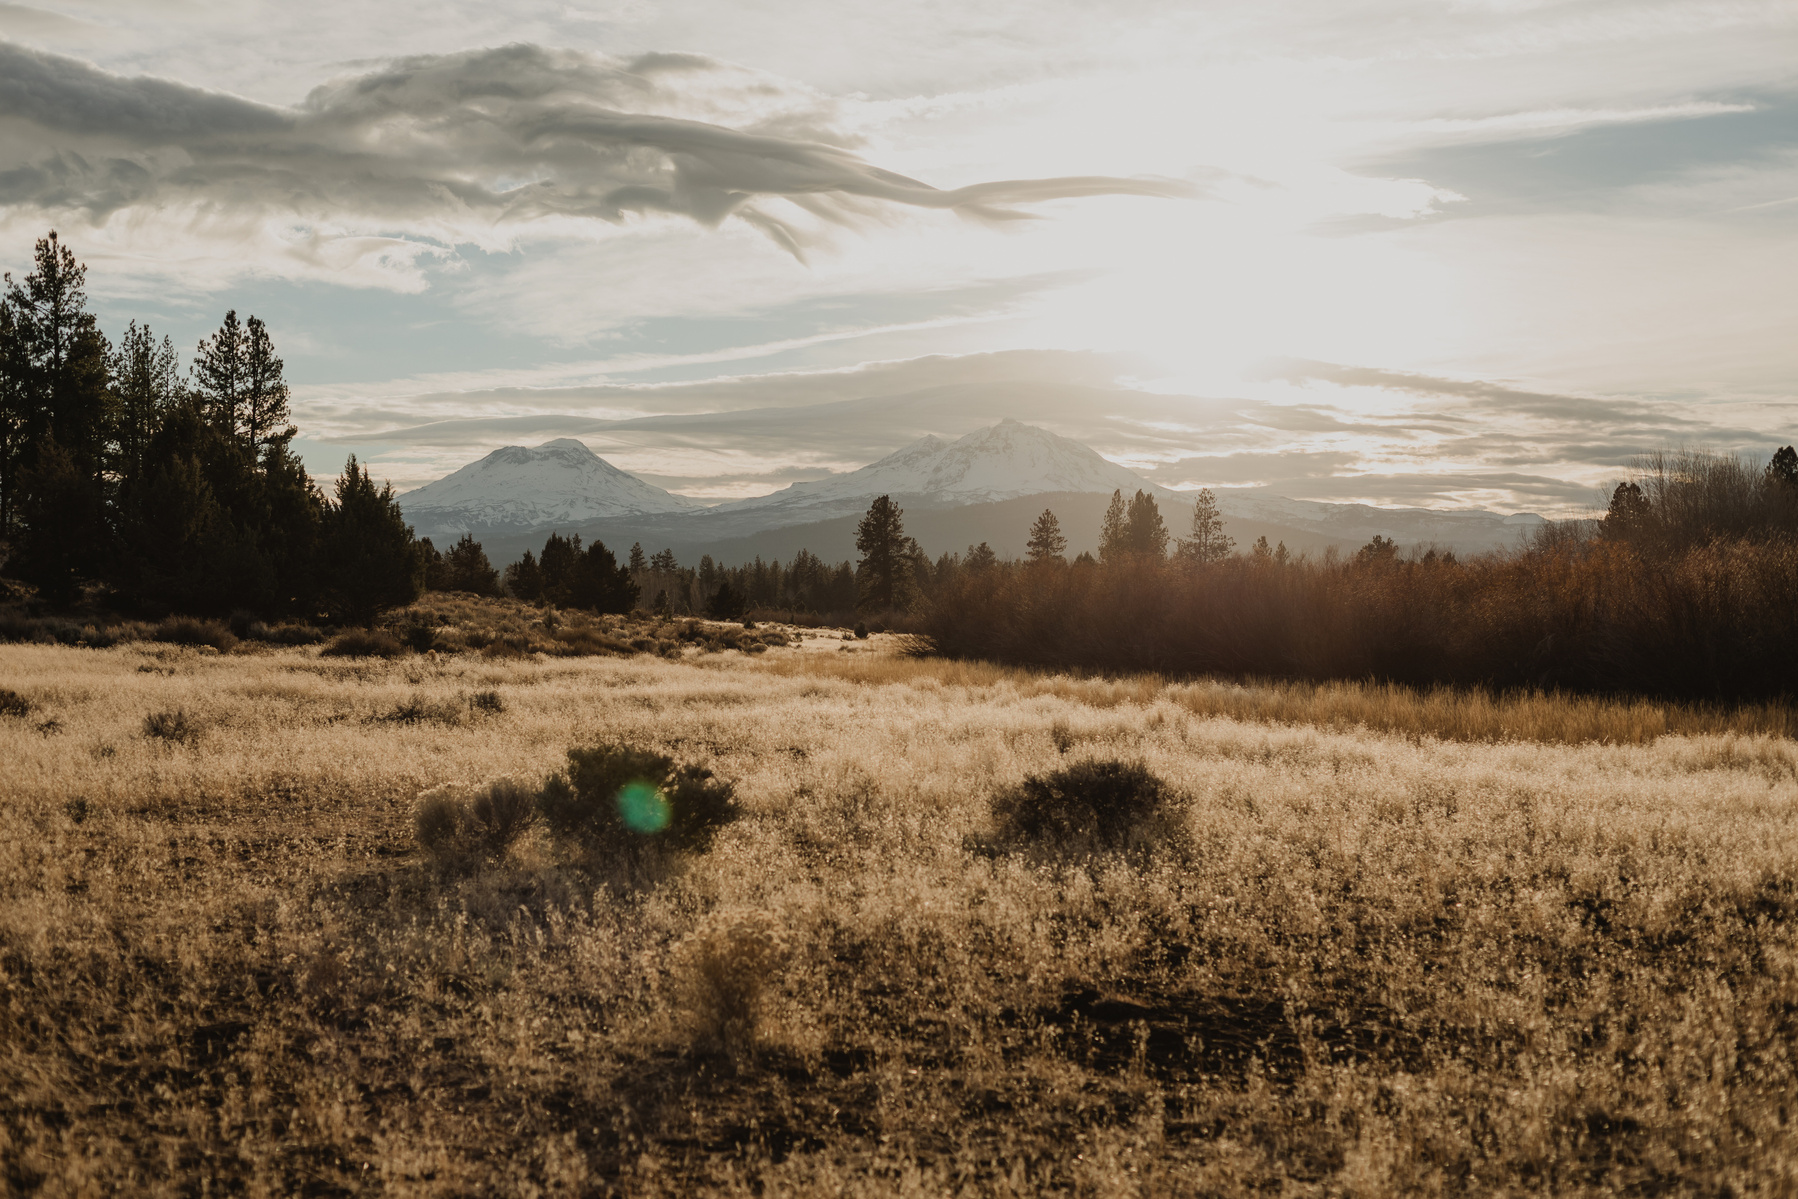 Engagement photo session in Bend, Oregon